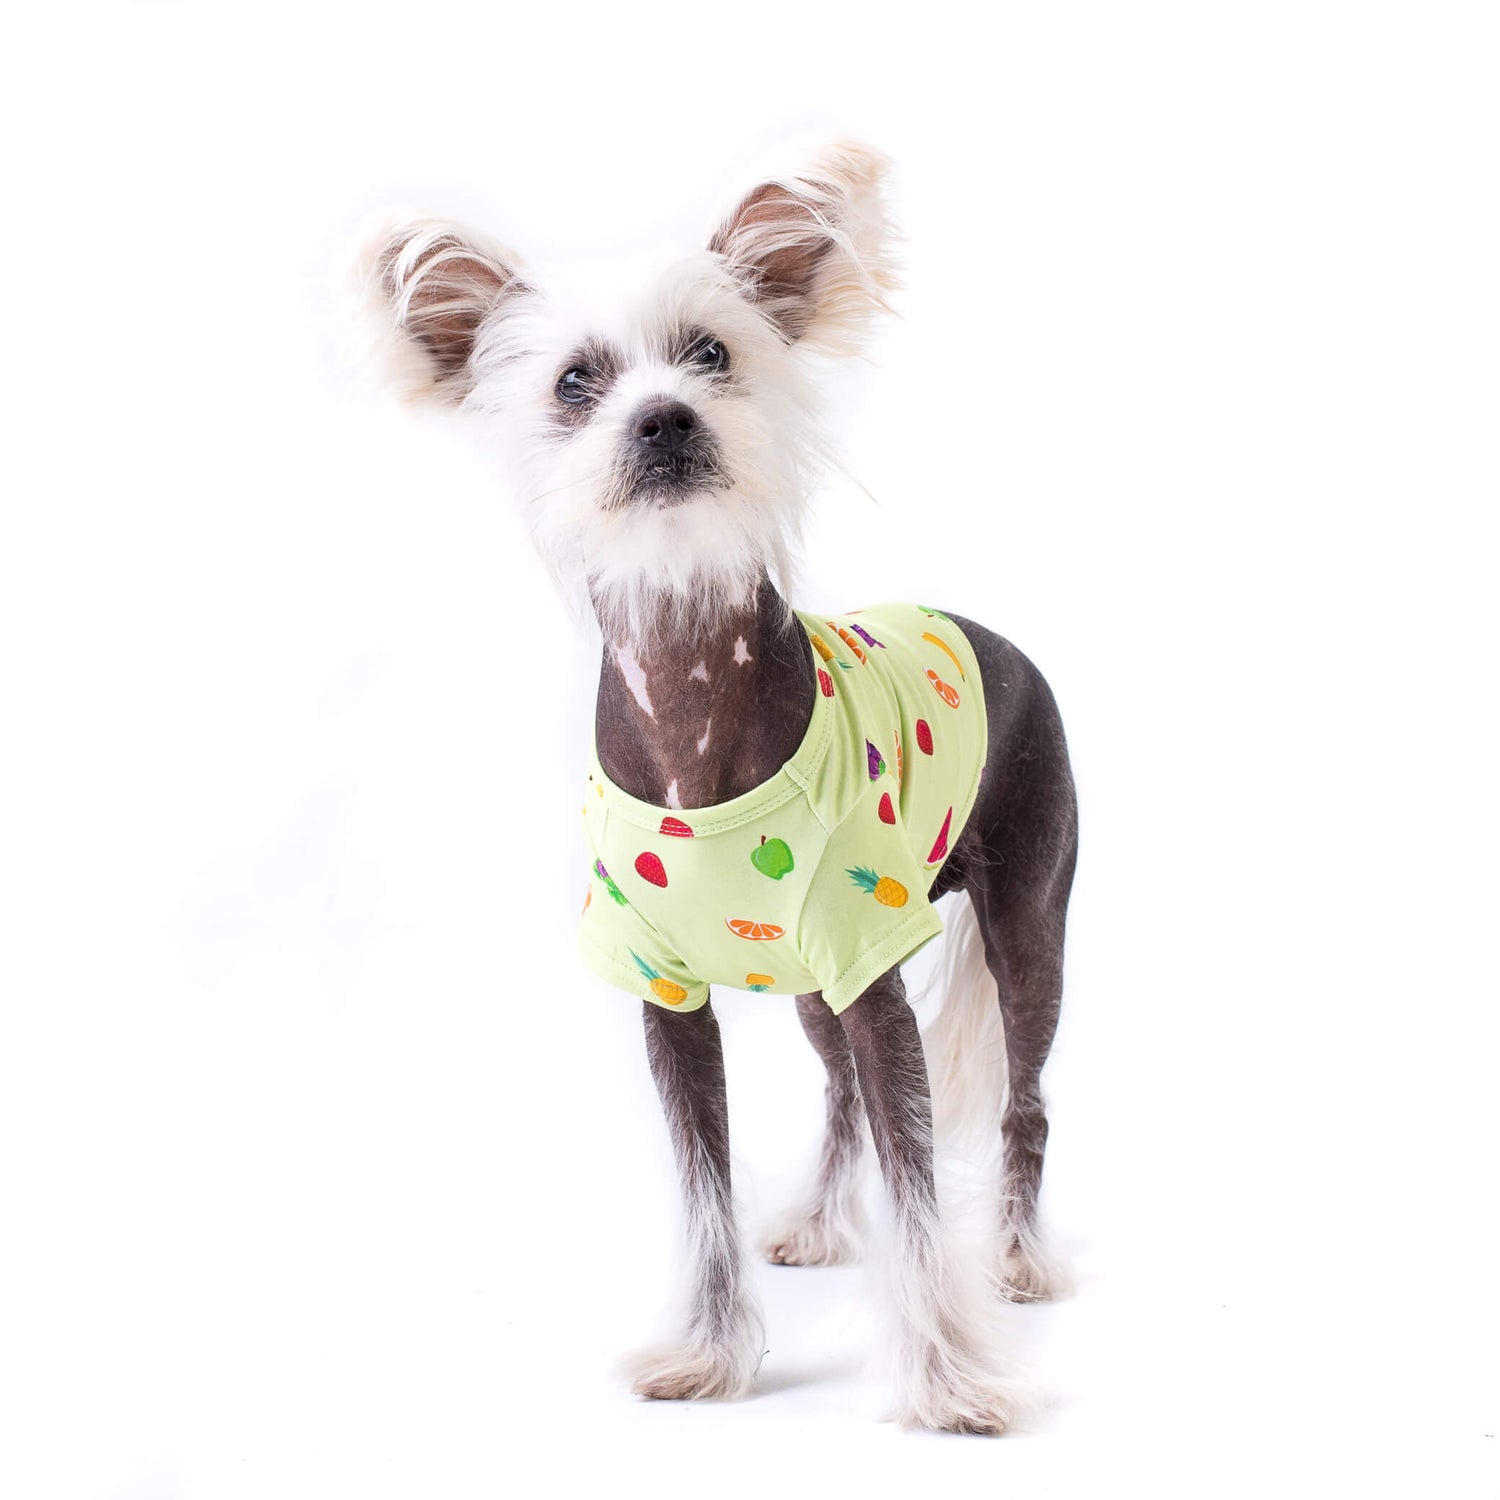 Chinese Crested wearing a feeling' Fruity vibrant hound dog shirt. It is lime green background and lots of tropical fruit printed on it.